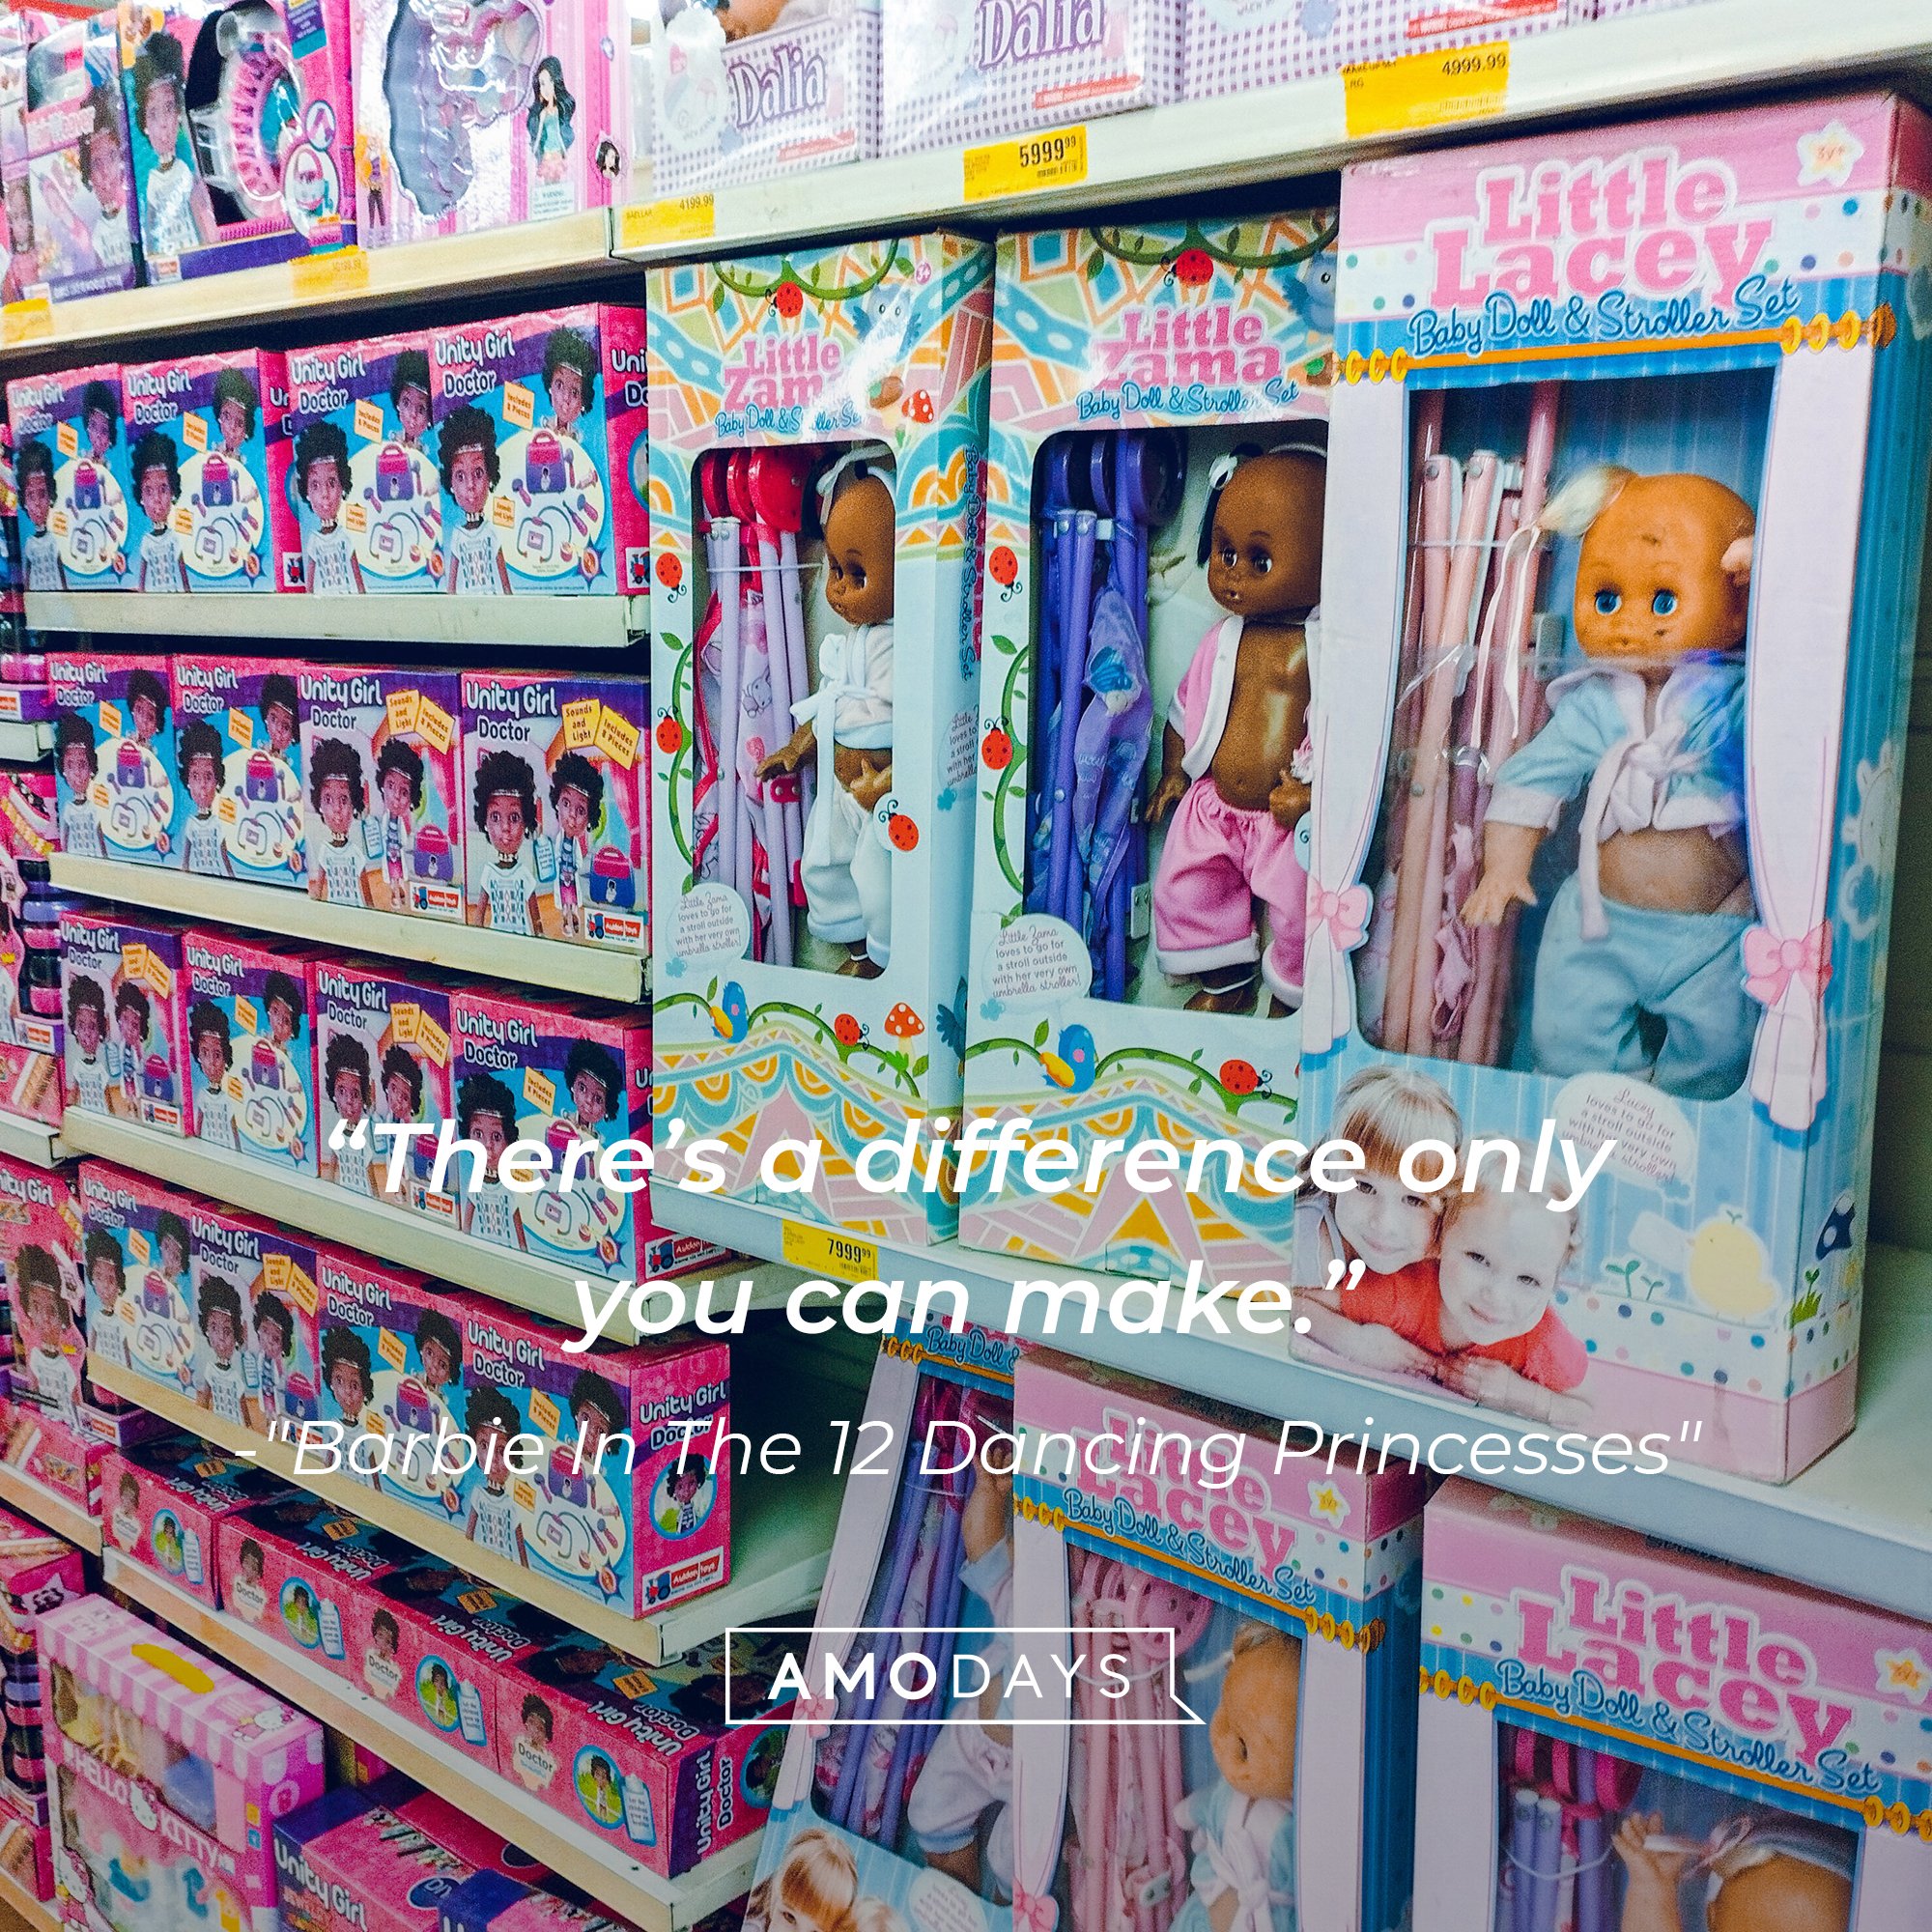 "Barbie In The 12 Dancing Princesses'" quote: "There’s a difference only you can make." | Image: AmoDays